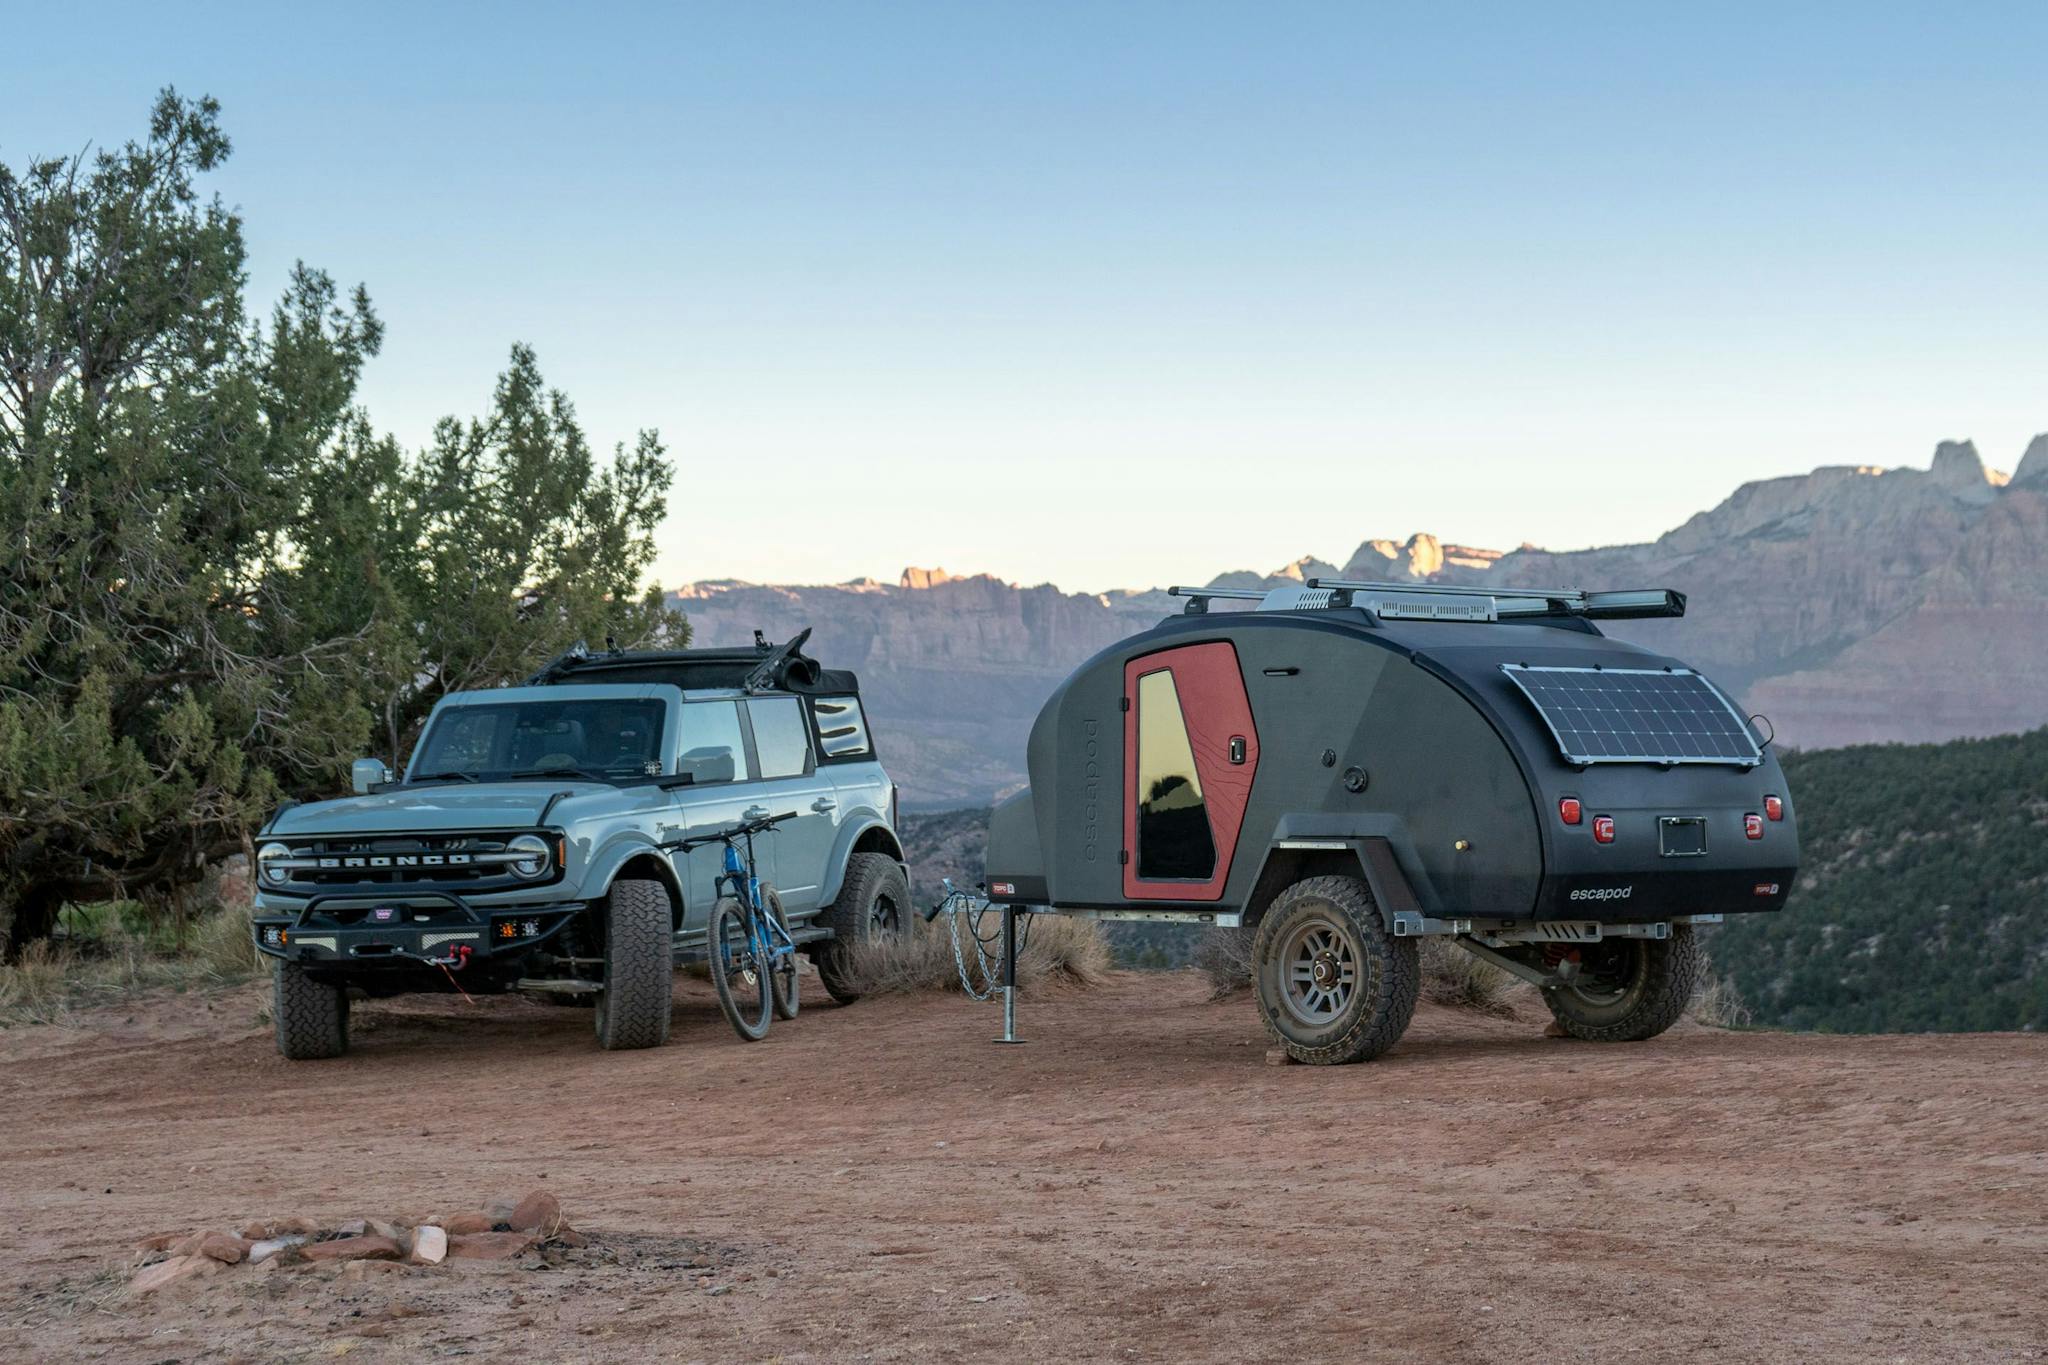 A blue teardrop trailer with fire doors parked in Gooseberry Mesa with a Ford Bronco.